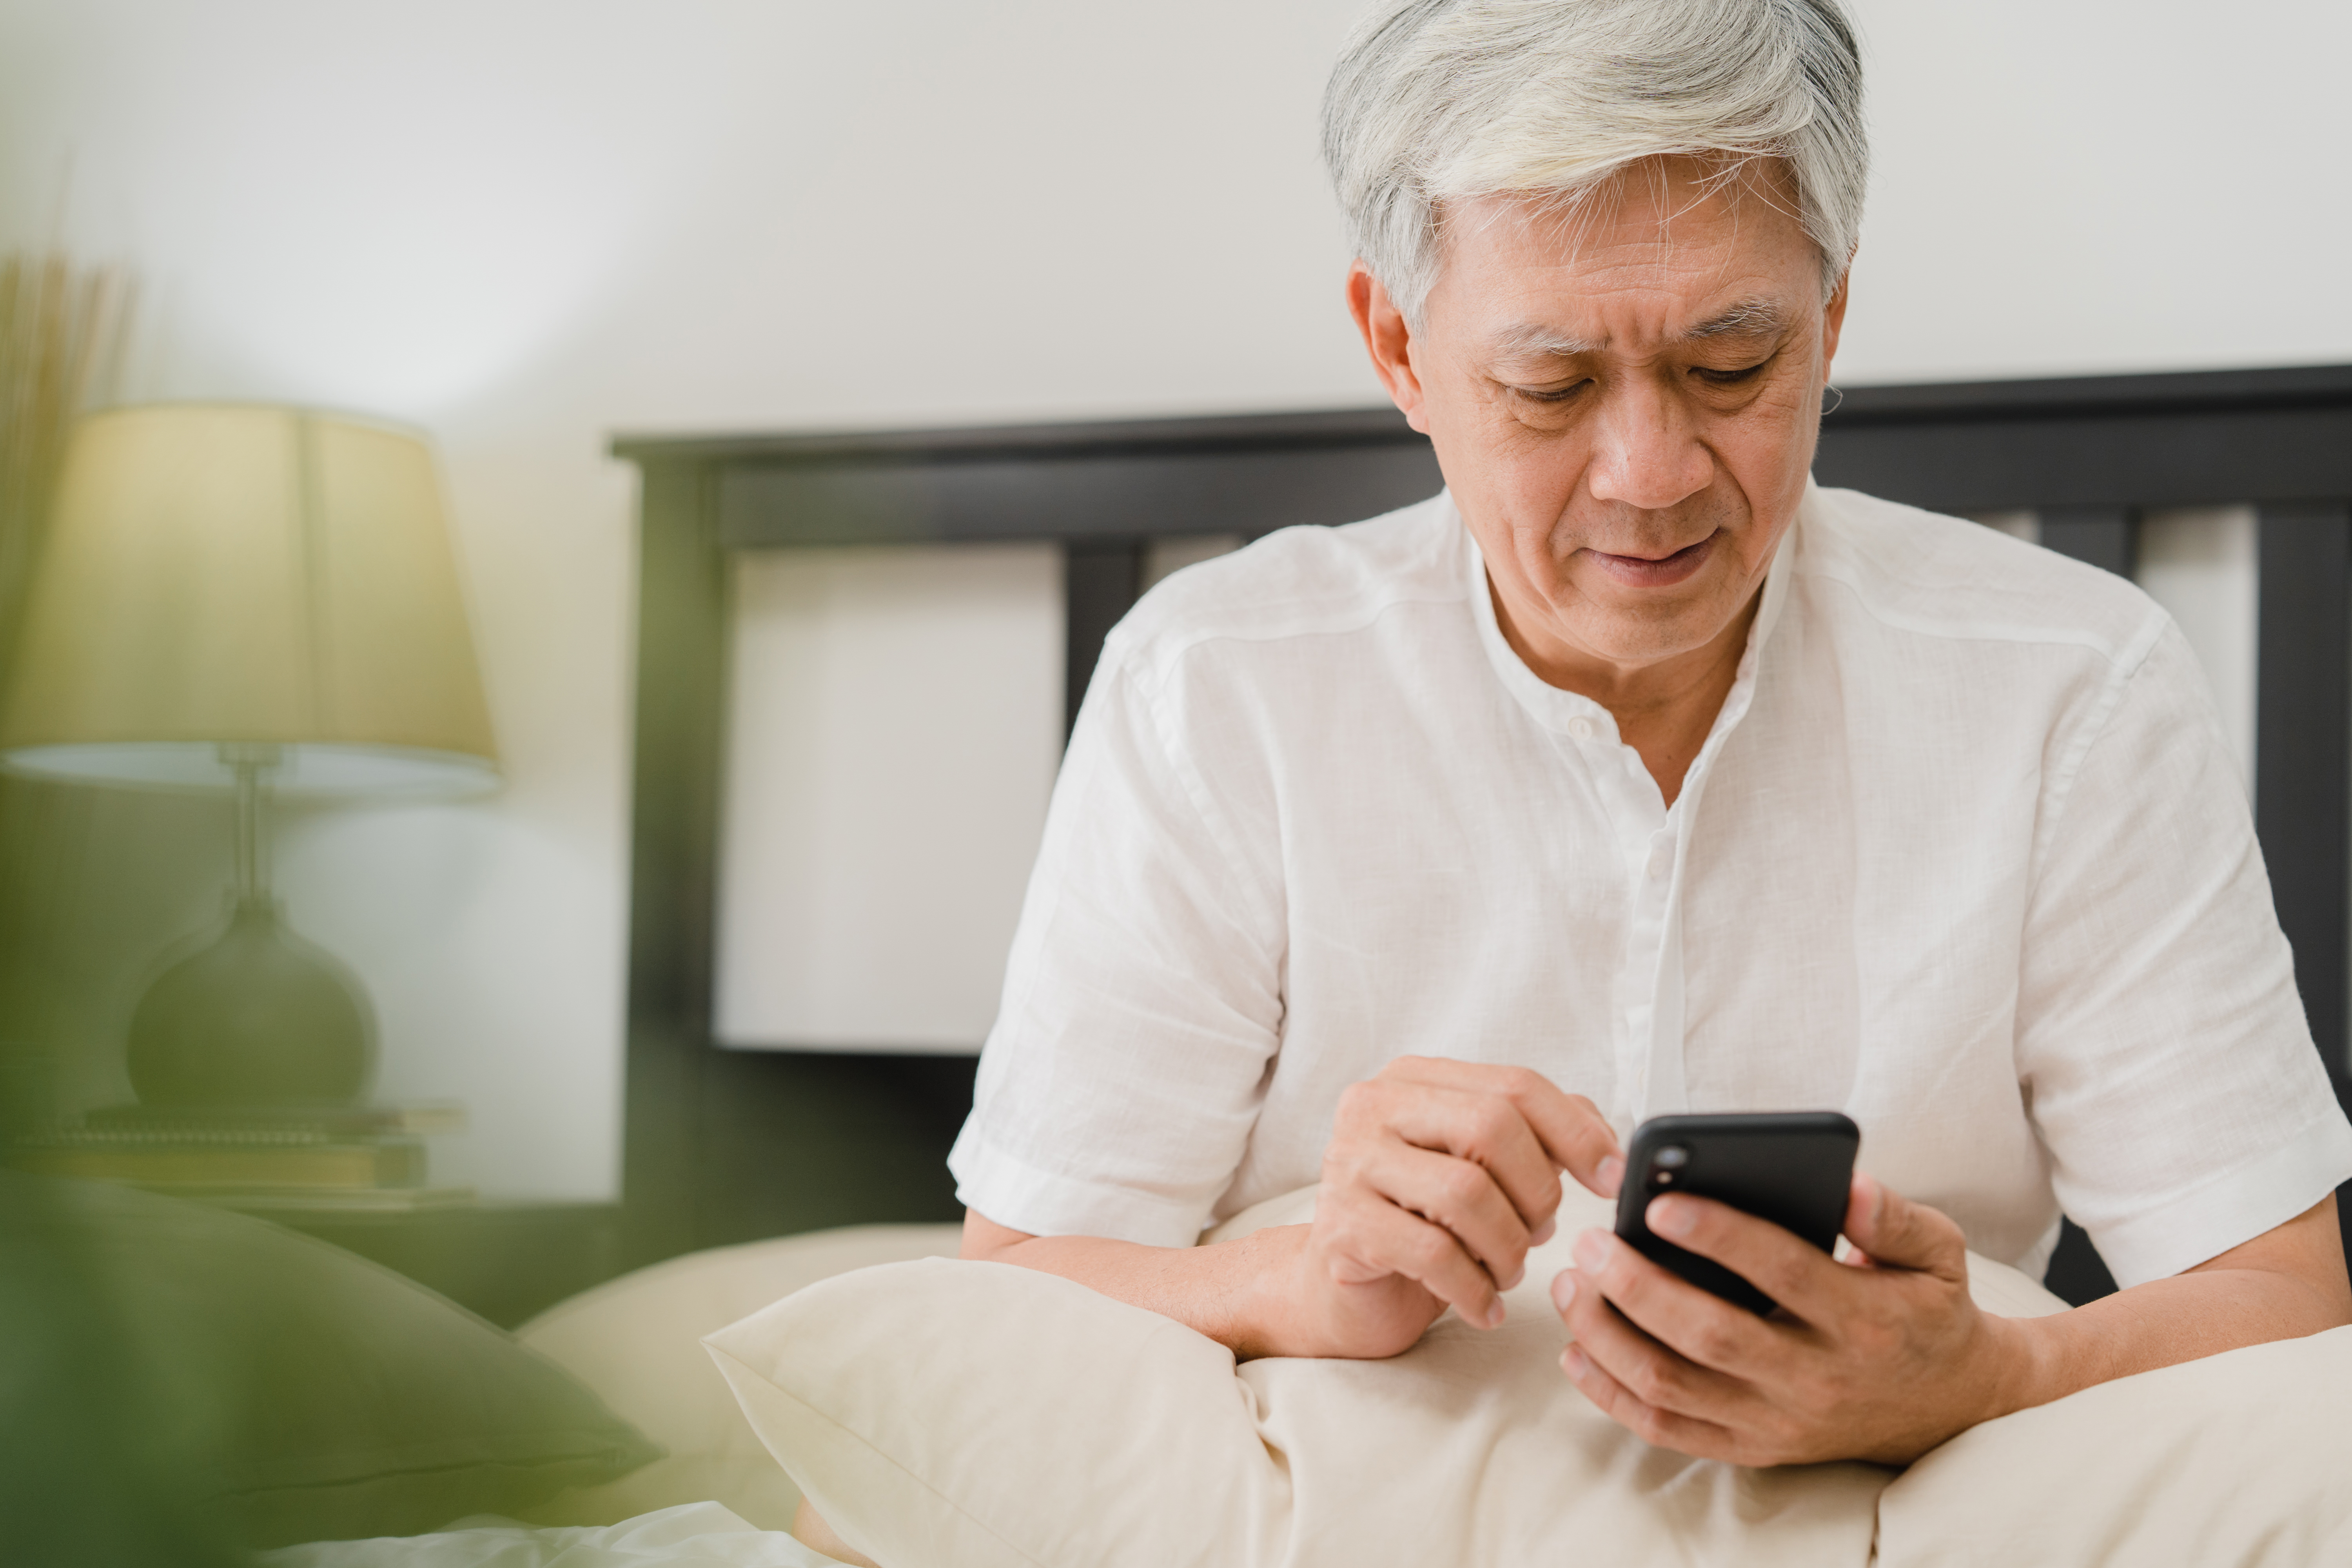 https://img.moneyduck.com/article_attachment/1671171896-asian-senior-men-using-mobile-phone-home-asian-senior-chinese-male-search-information-about-how-good-health-internet-while-lying-bed-bedroom-home-morning-concept.jpg